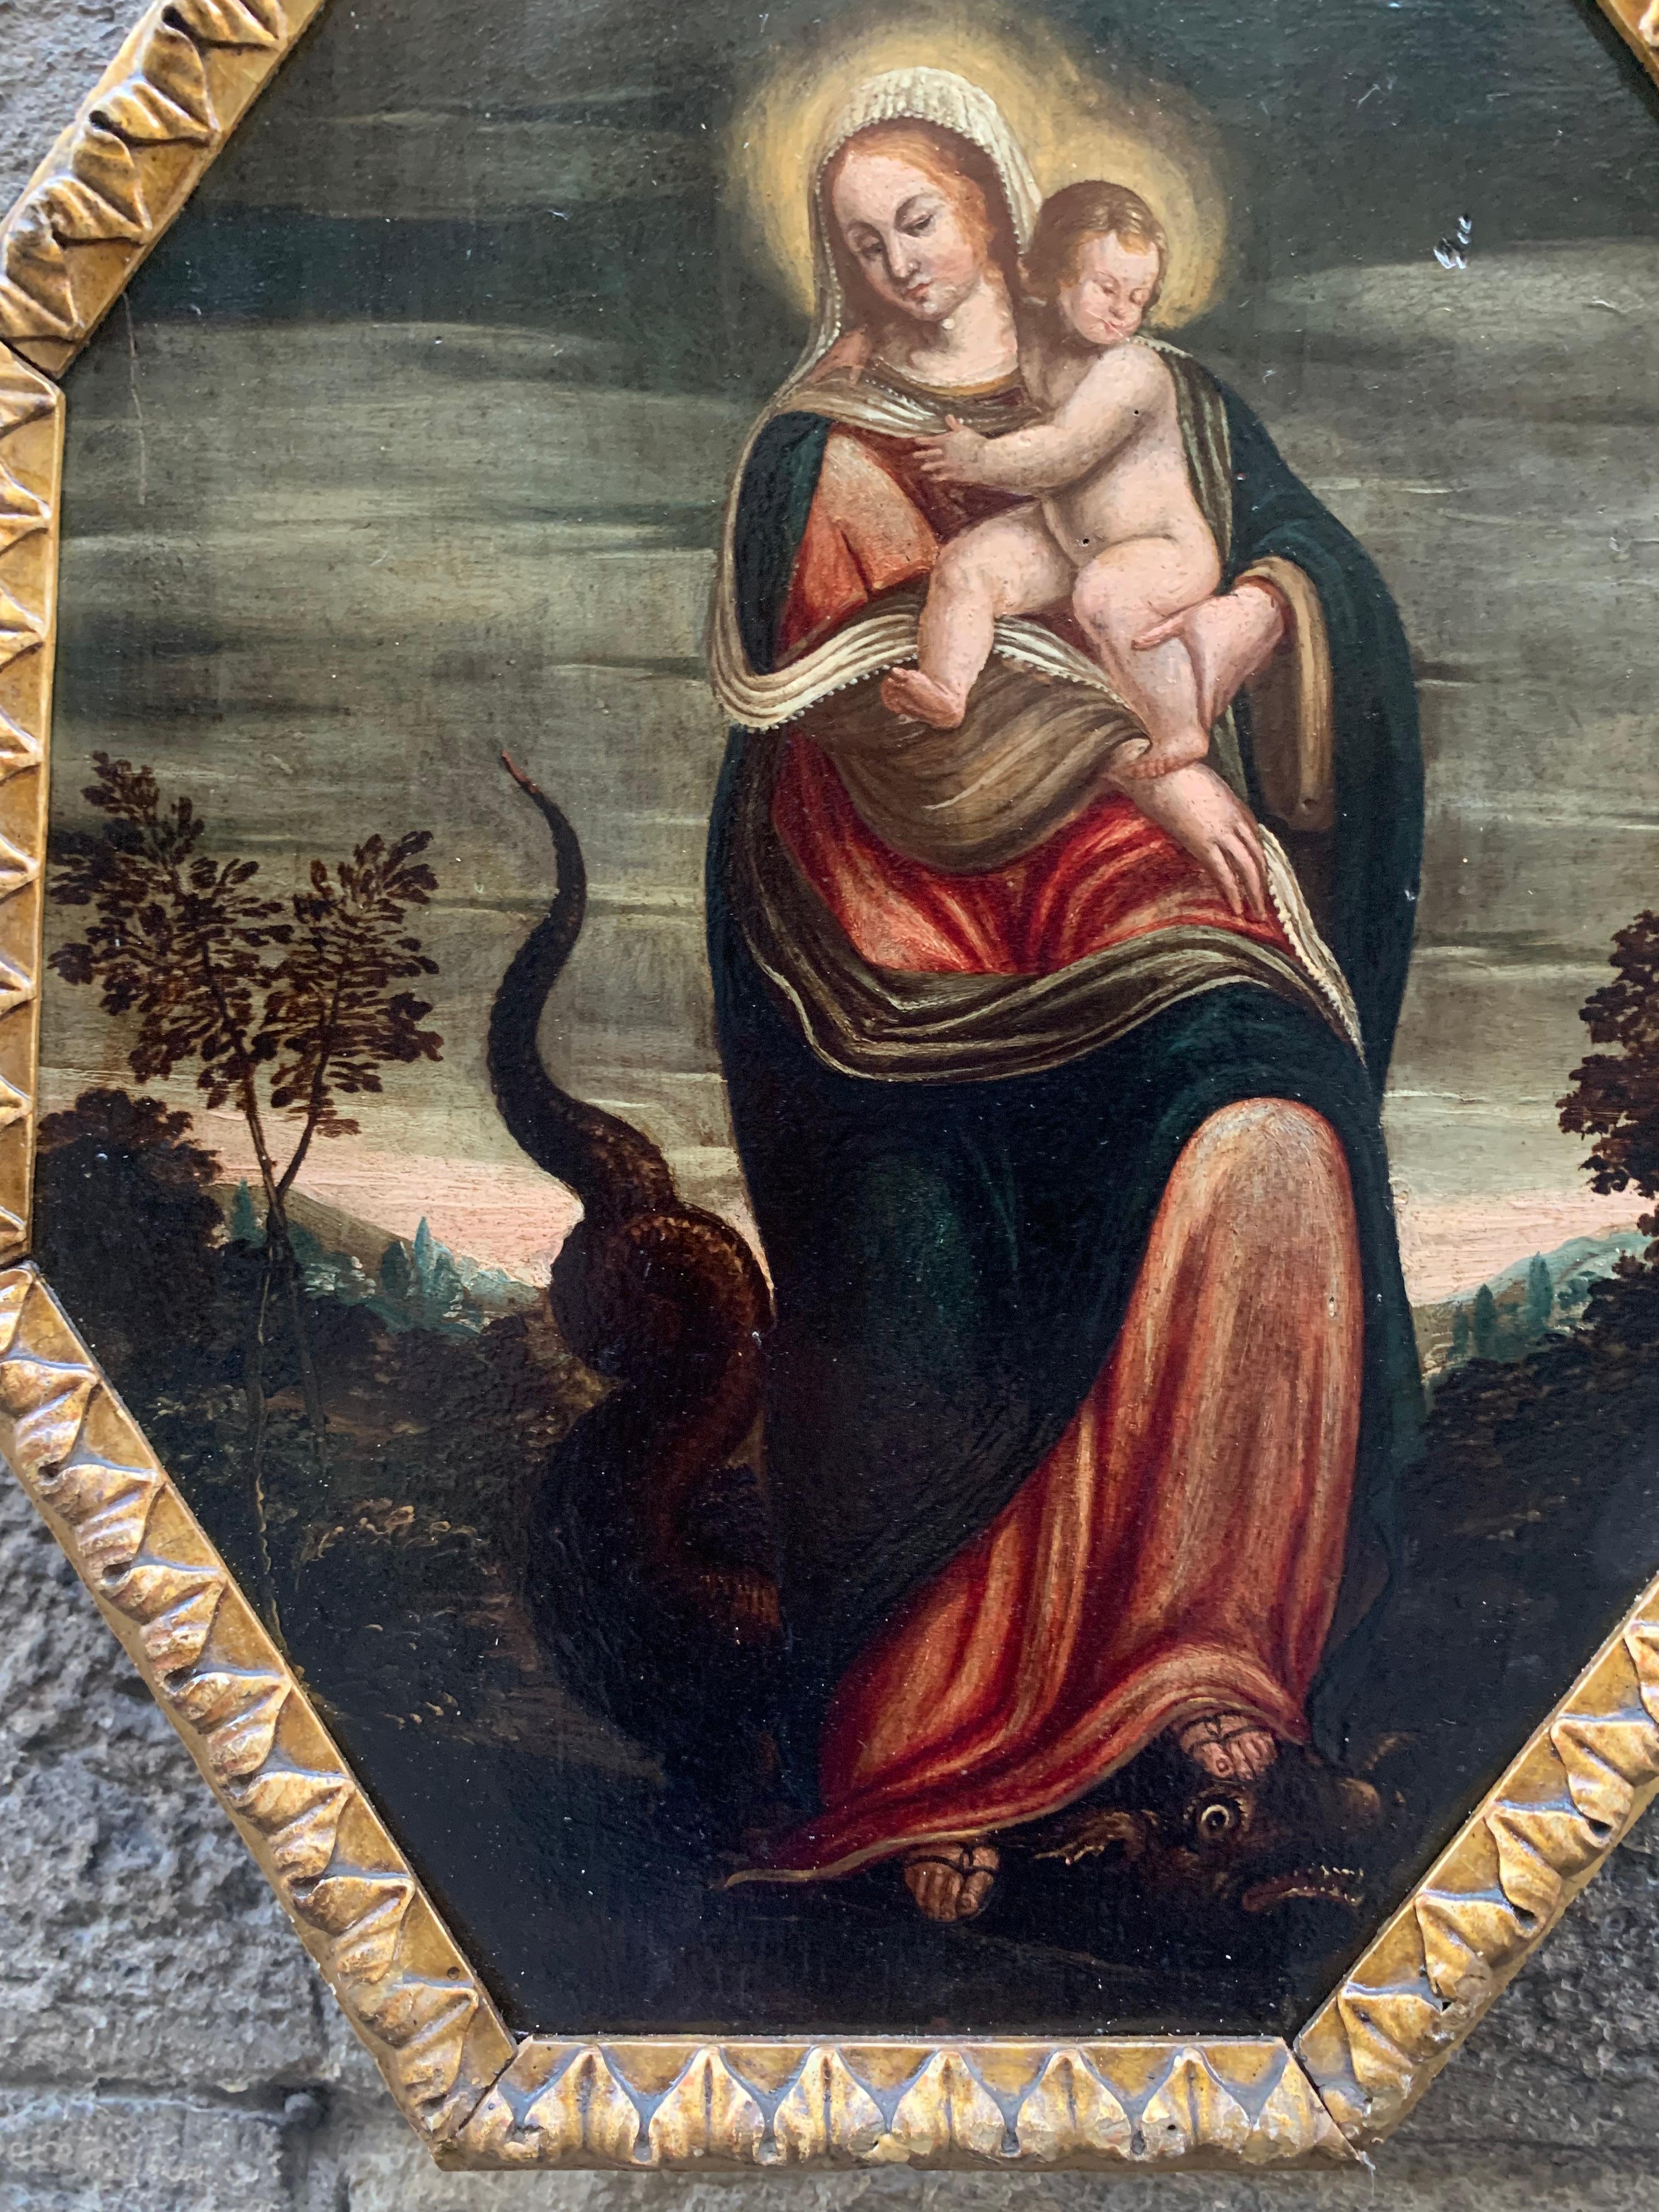 Late 16th century. Immaculate conception. Virgin with child and dragon. For Sale 1